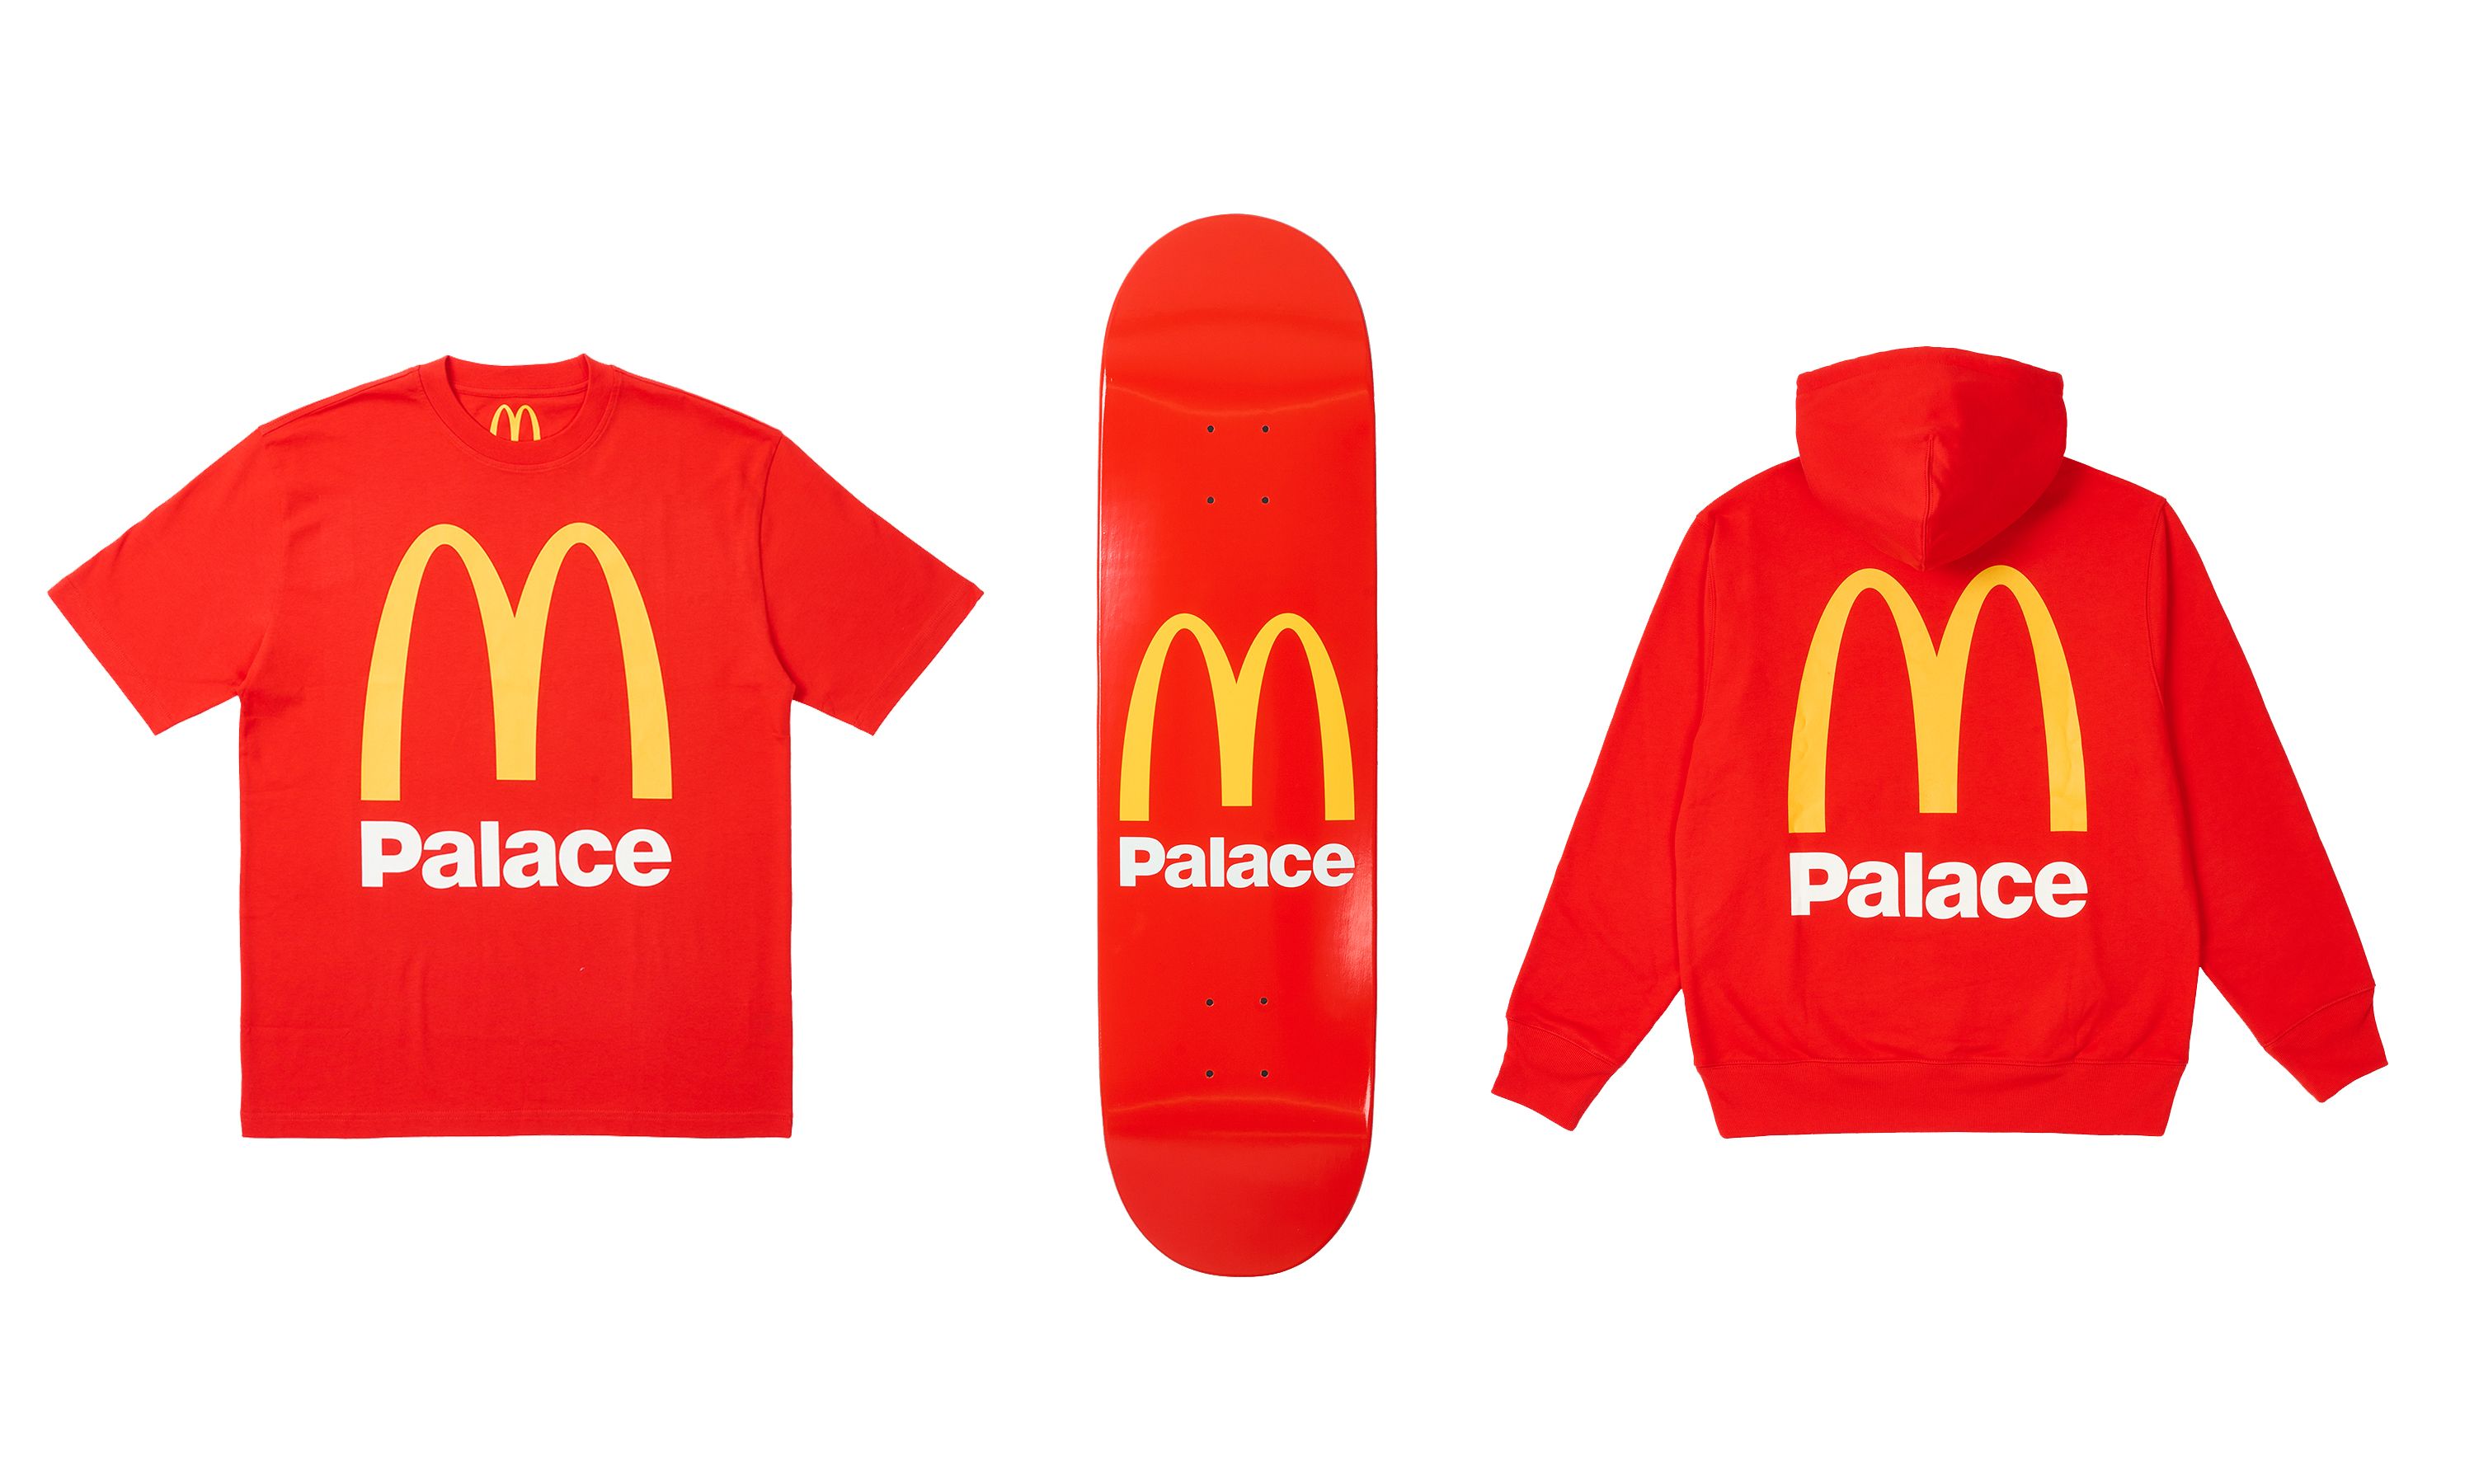 How to Buy the McDonald's x Palace Collaboration